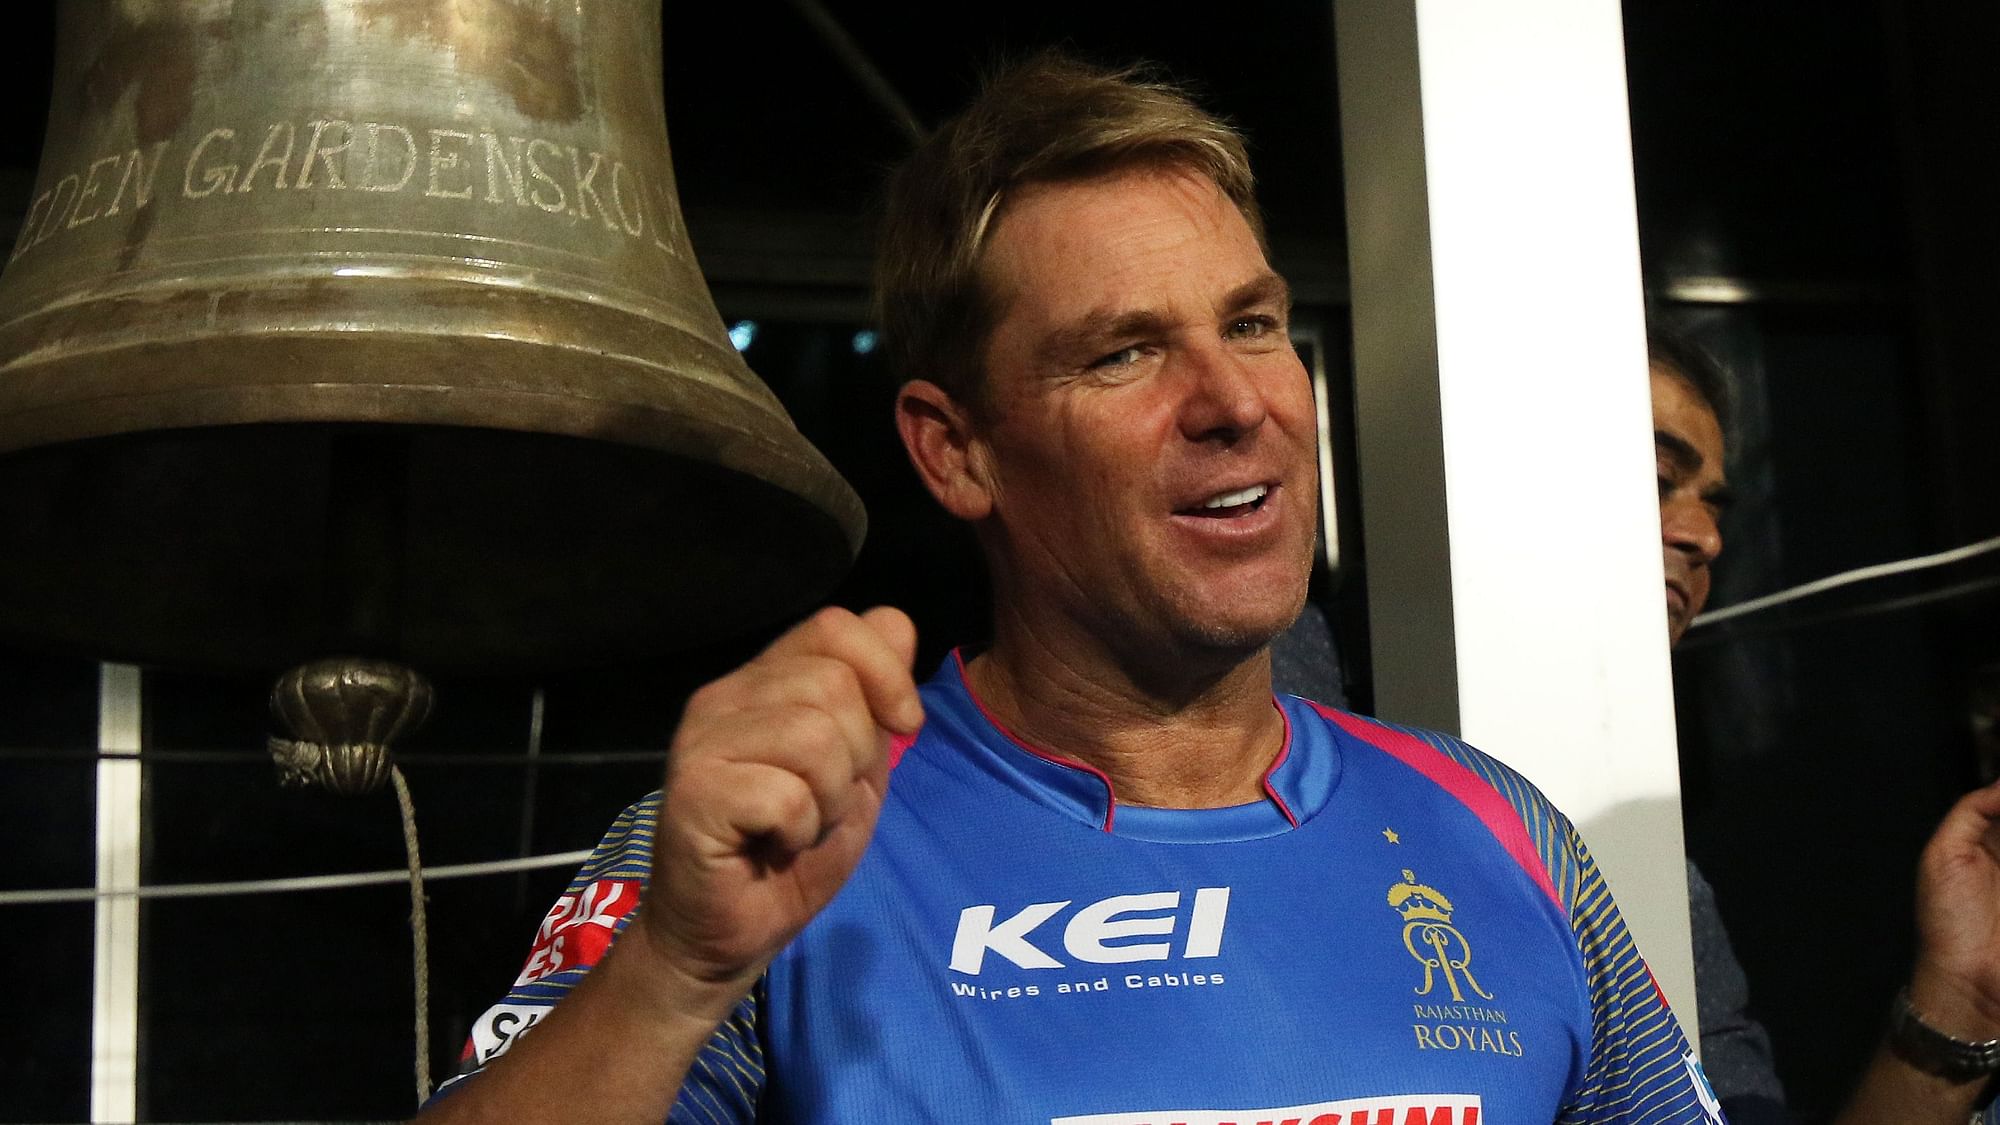 Shane Warne said Steve Waugh was “easily the most selfish cricketer” that he ever played with.